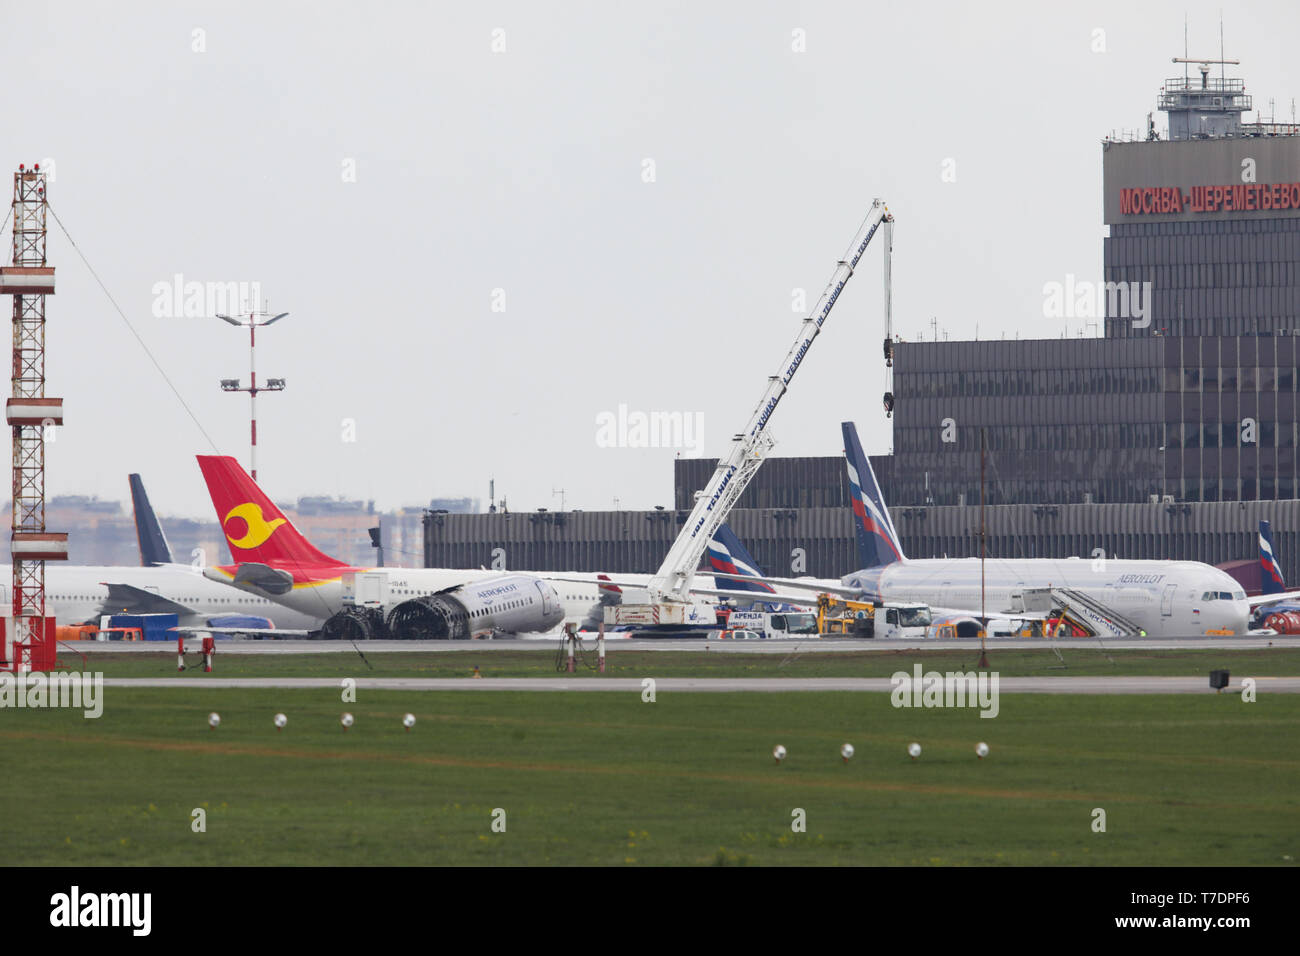 Moscow, Russia. 6th May, 2019. Burnt fuselage of an Aeroflot SSJ-100 passenger plane is seen on the tarmac at Sheremetyevo International Airport in Moscow, Russia, on May 6, 2019. Russia's Investigative Committee confirmed Monday that 41 people were killed after an SSJ-100 passenger plane en route to the northwestern Russian city of Murmansk caught fire before an emergency landing Sunday at the Sheremetyevo International Airport in Moscow. Credit: Maxim Chernavsky/Xinhua/Alamy Live News Stock Photo